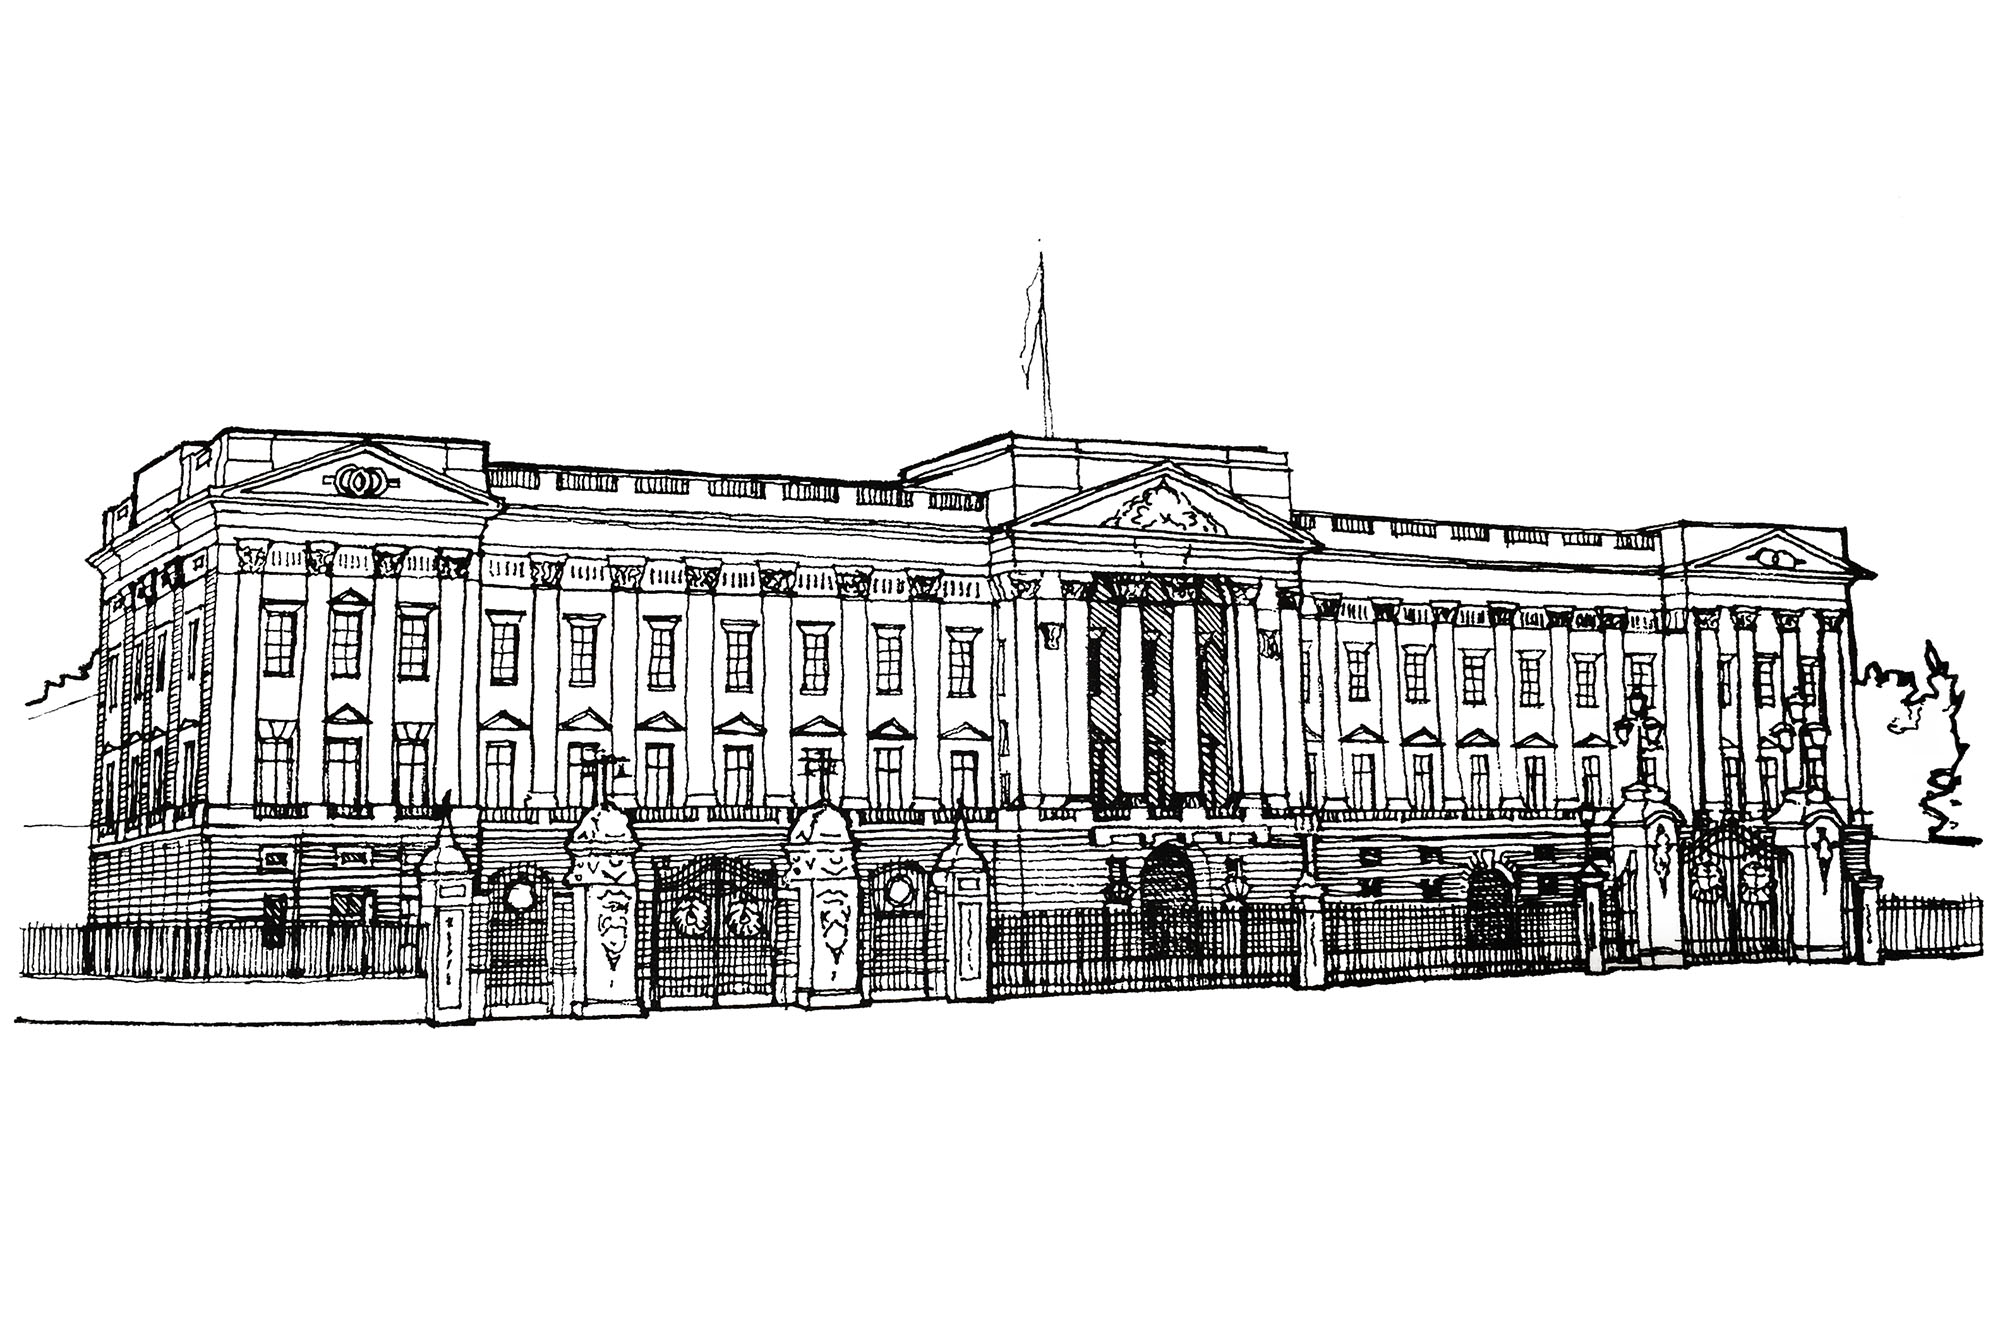 Download Buckingham Palace Illustration 1820 Architecture Adult Coloring Pages